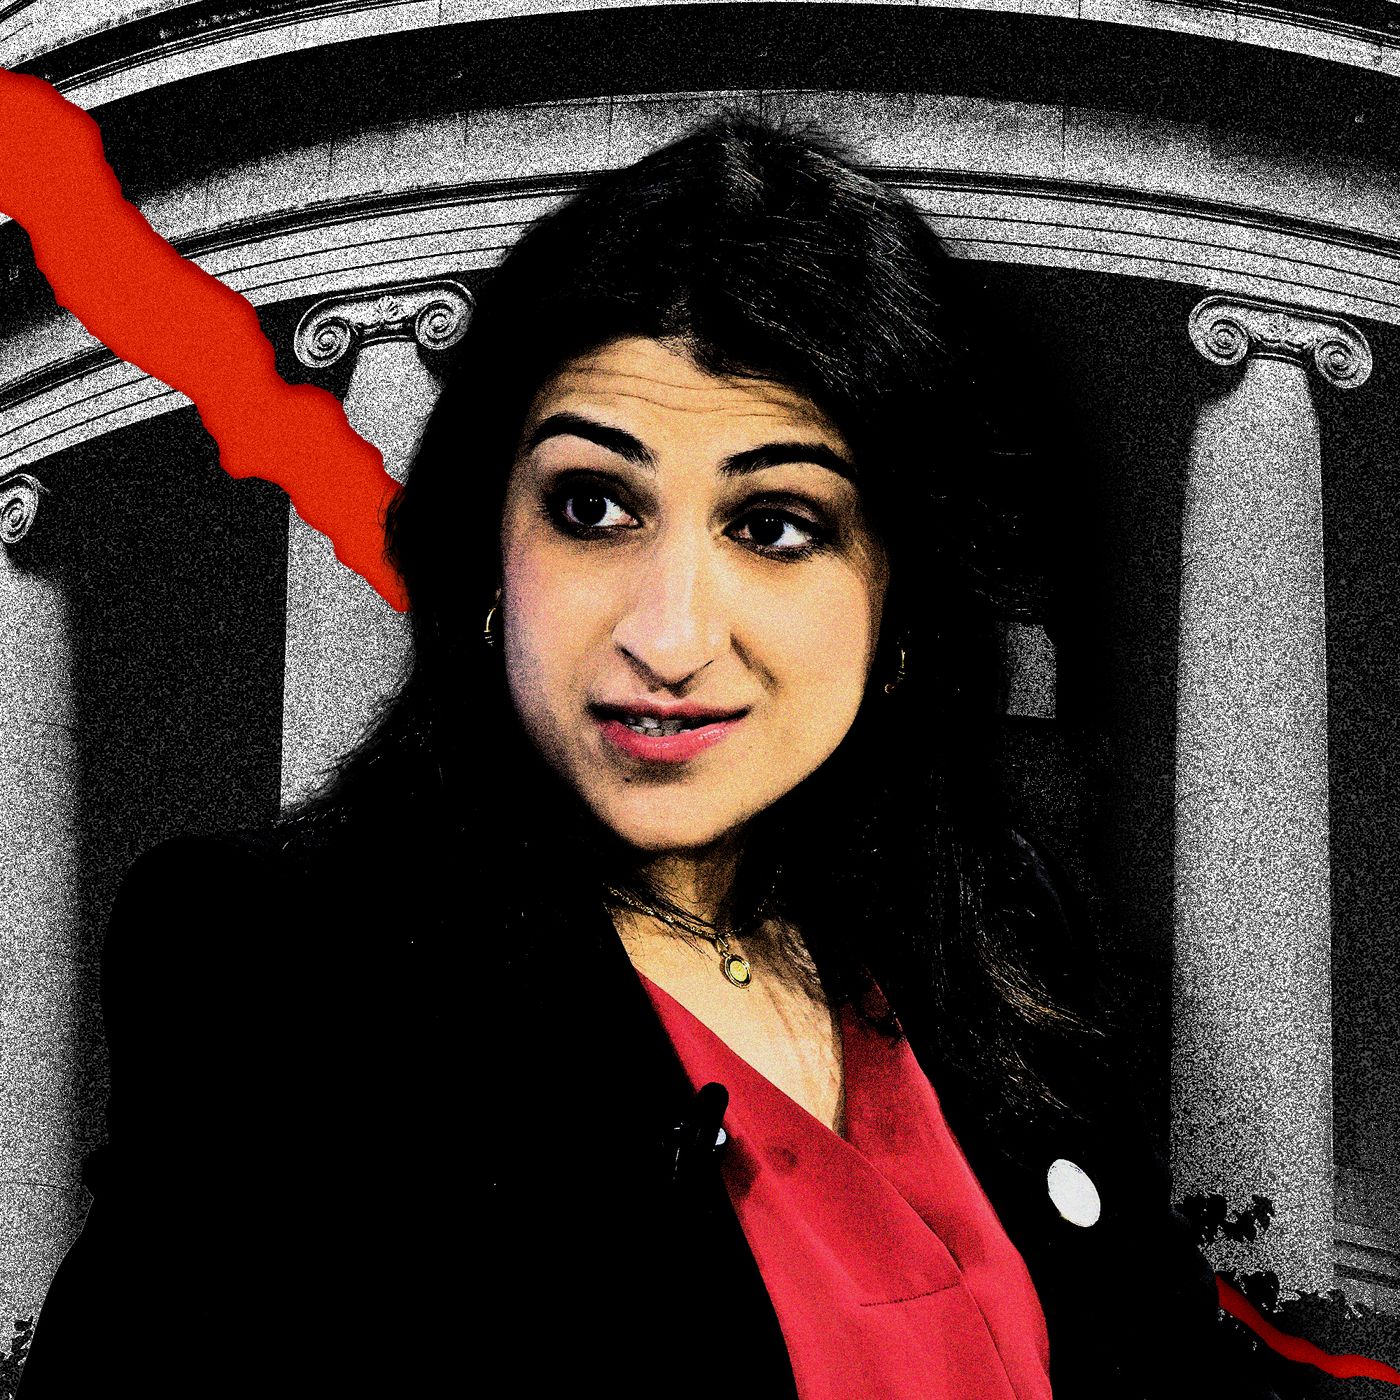 Lina Khan's rise was heralded as an antitrust revolution. Now she has to  pull it off